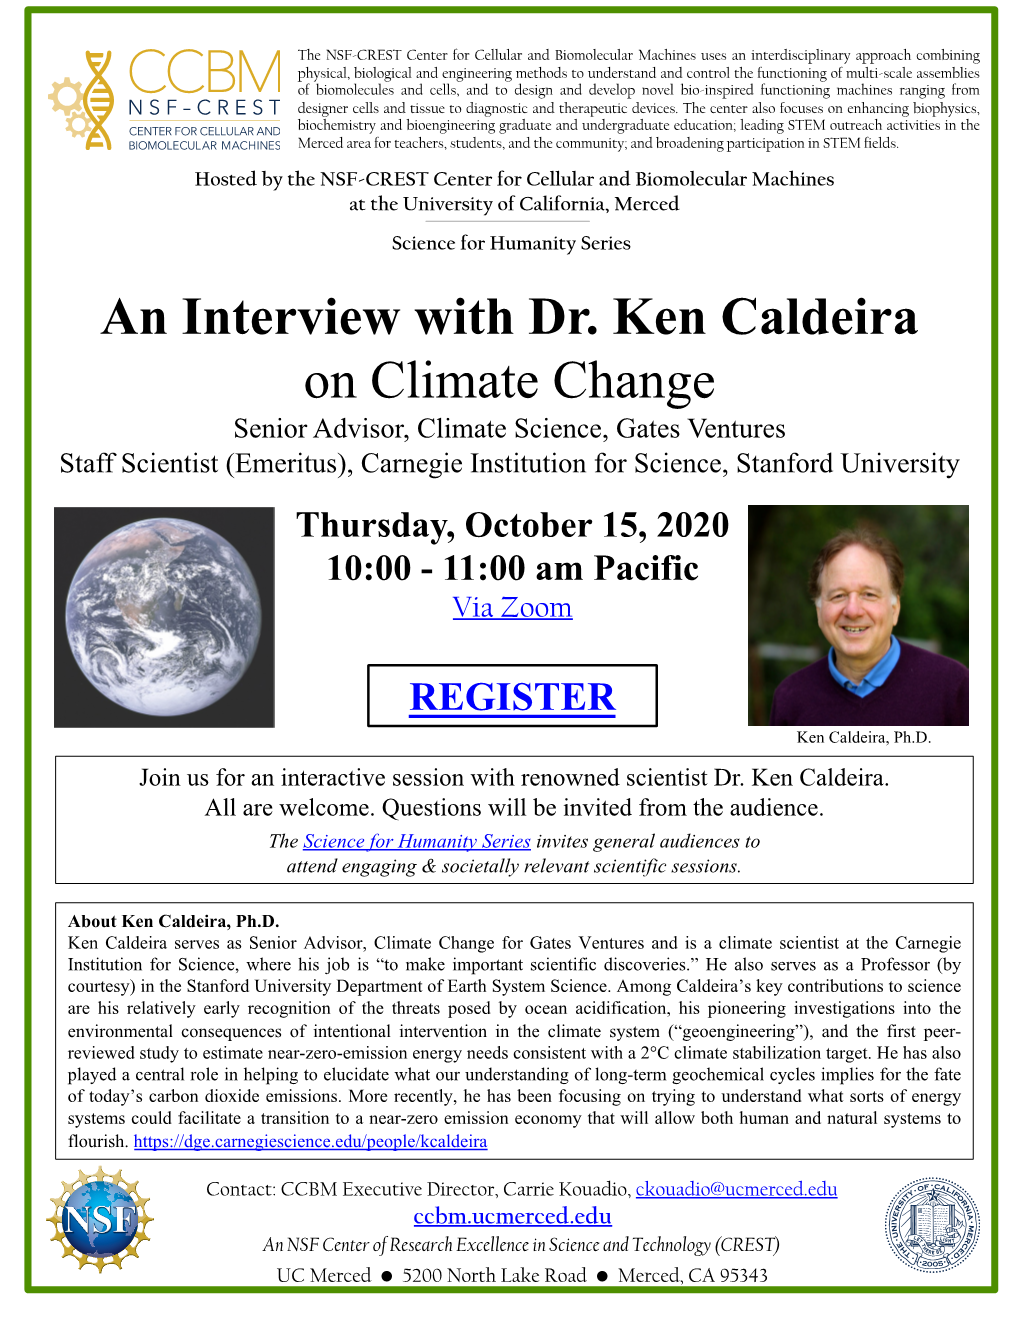 An Interview with Dr. Ken Caldeira on Climate Change